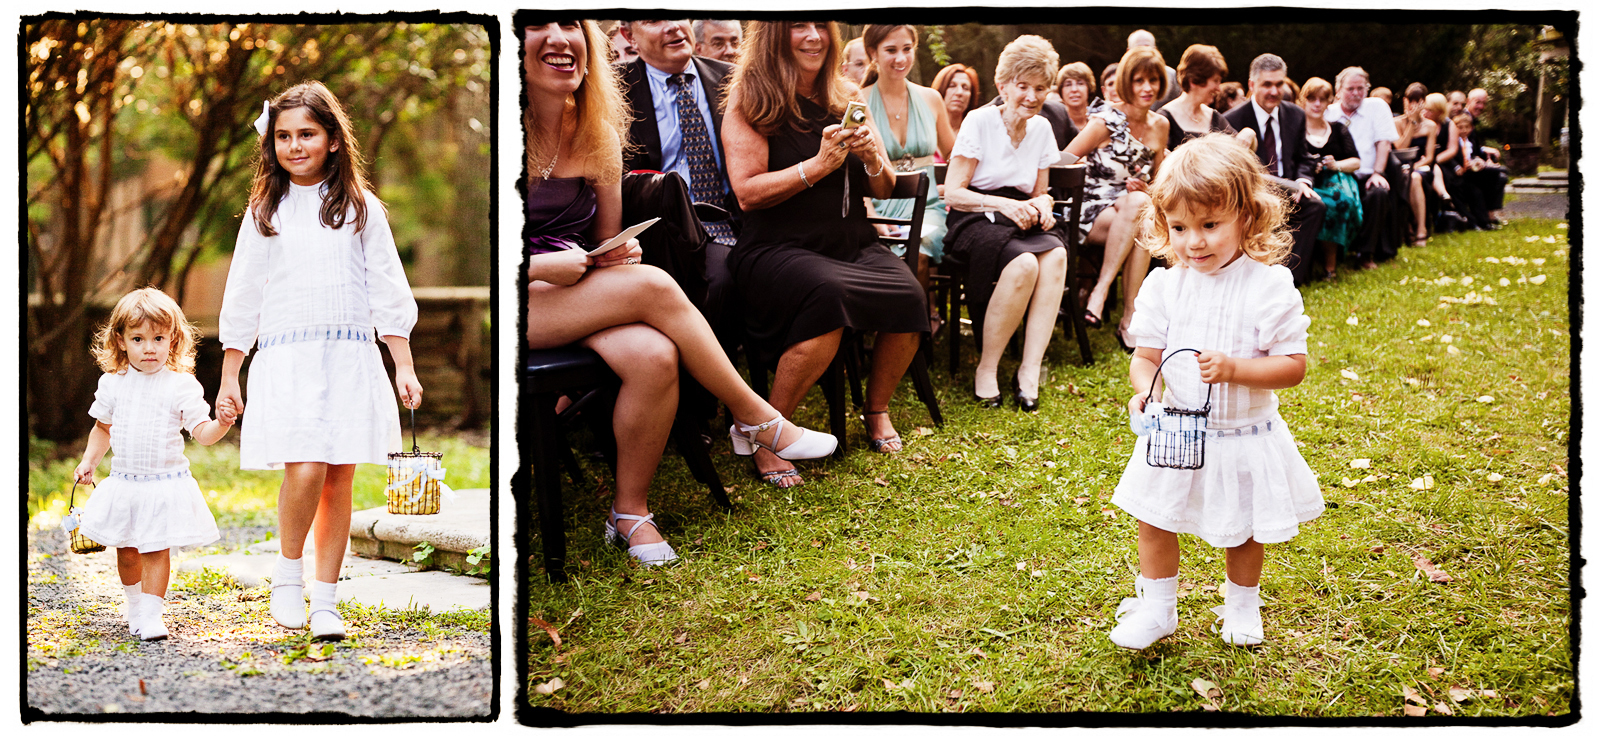 Charming white vintage flowergirl dresses complemented this DIY outdoor wedding.